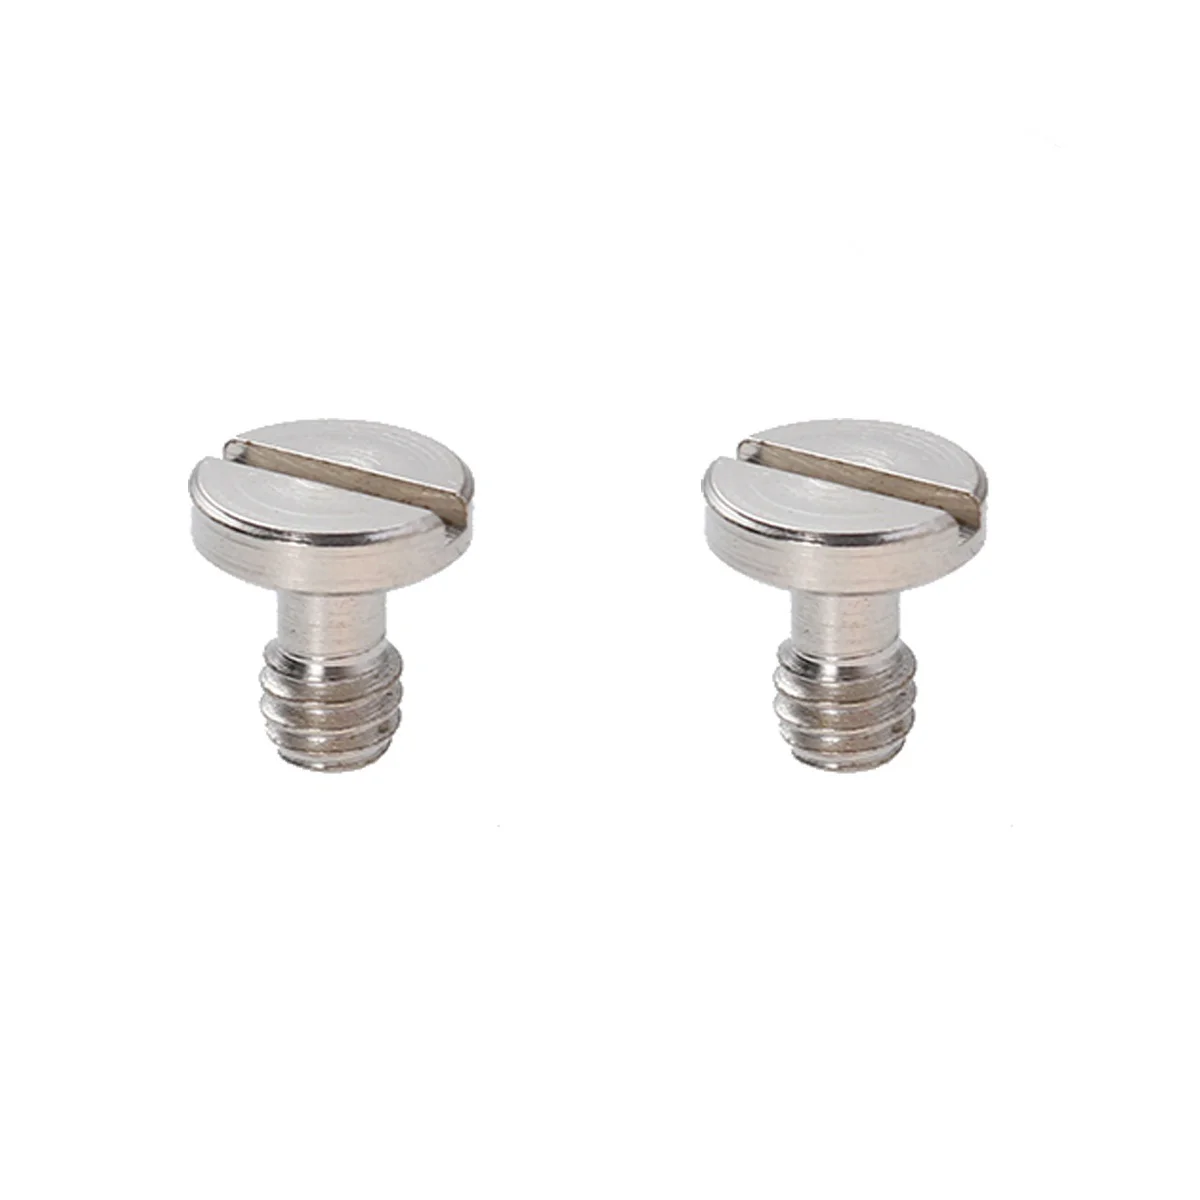 

2Pcs Screws with Stainless Steel Material for Tripod Monopod Quick Release Plate Camera Screws